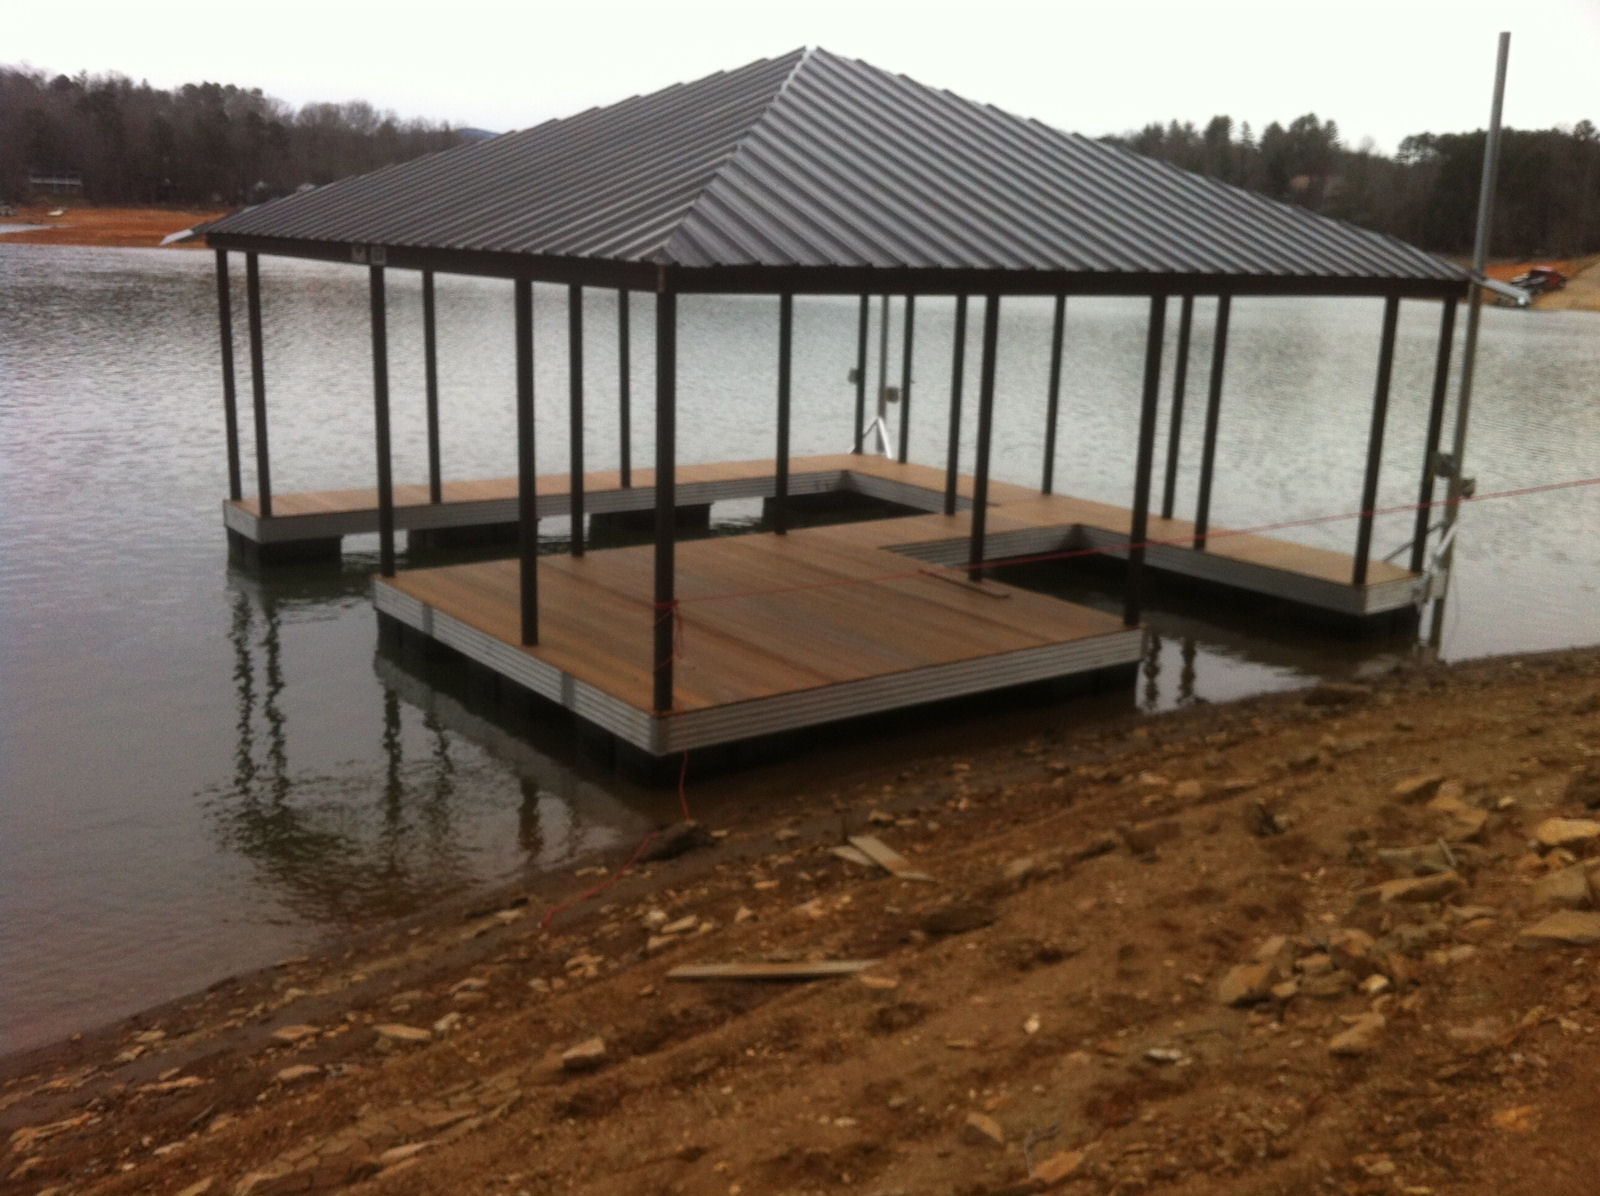 ... ga designed by jon pack and his team at ngbl north georgia boat lift